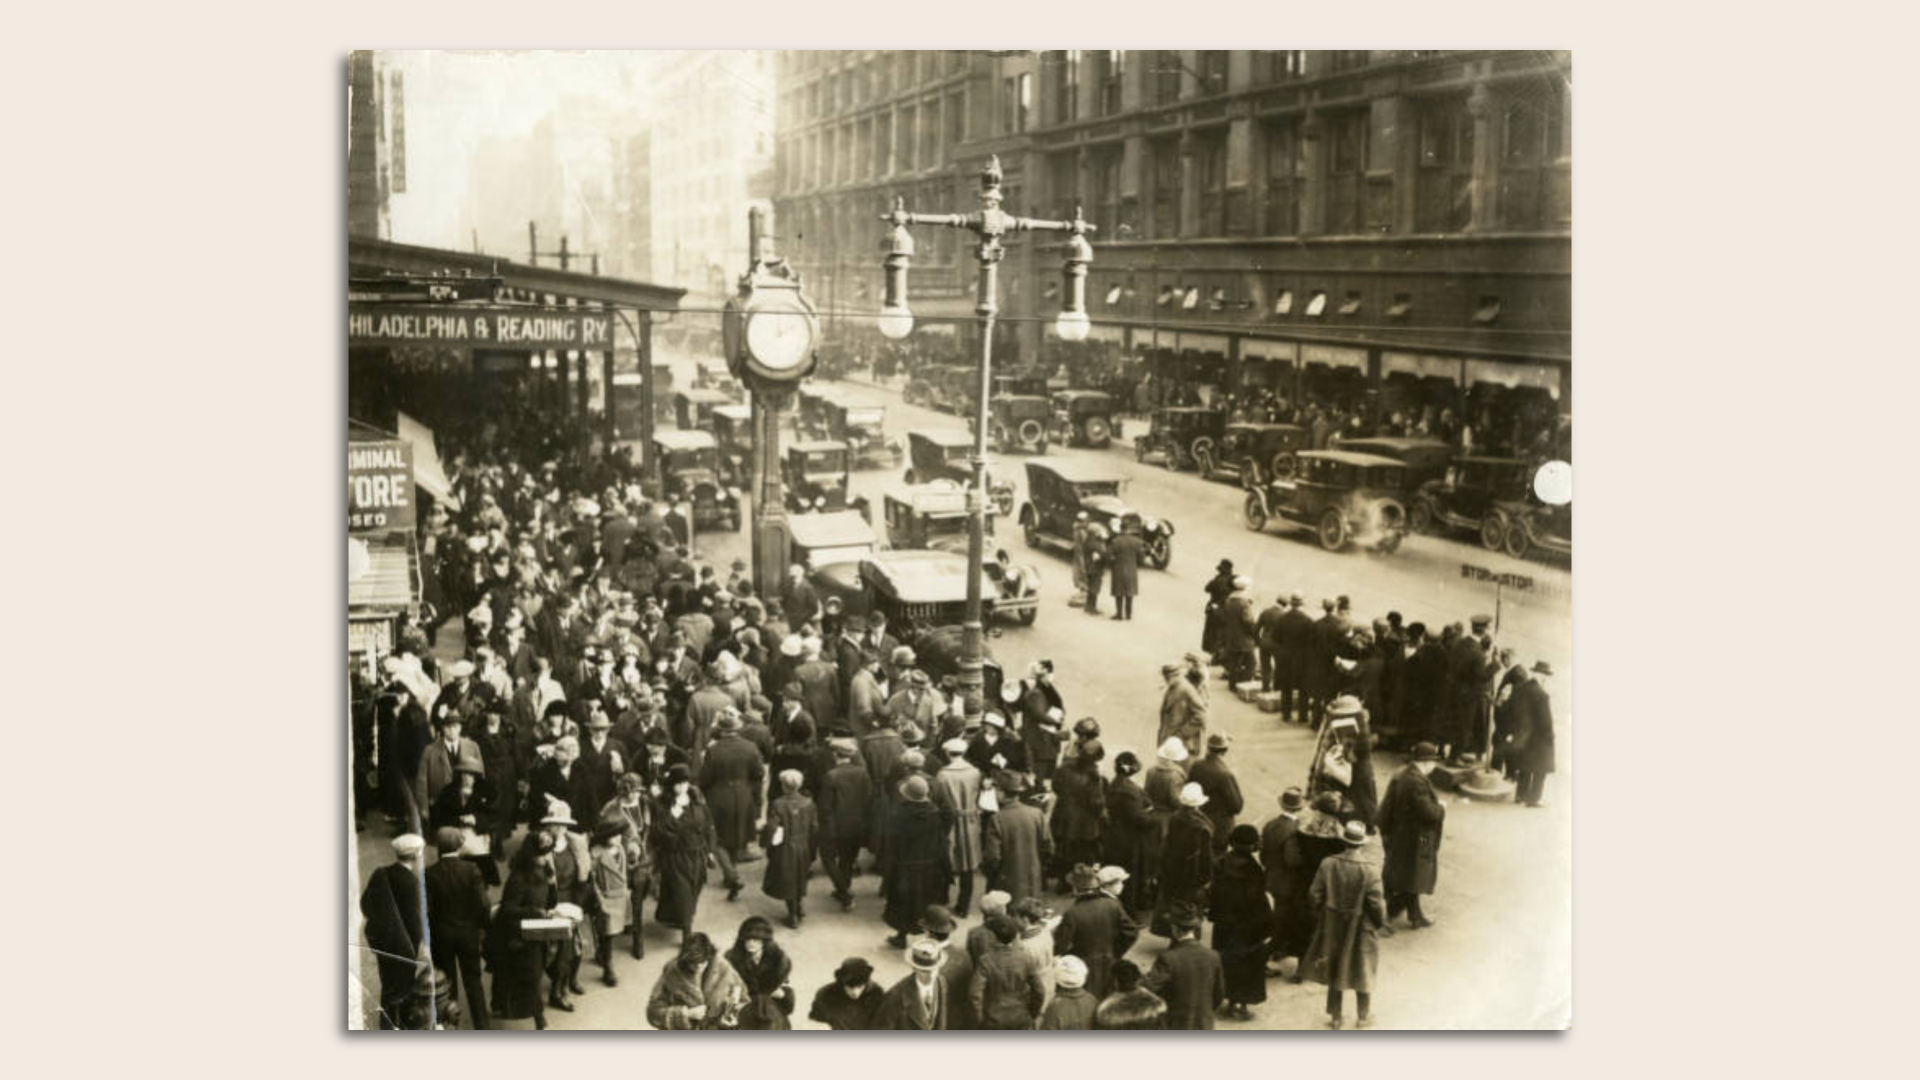 A black-and-white photo of Philadelphians gathering a Market Street in the 1920s.